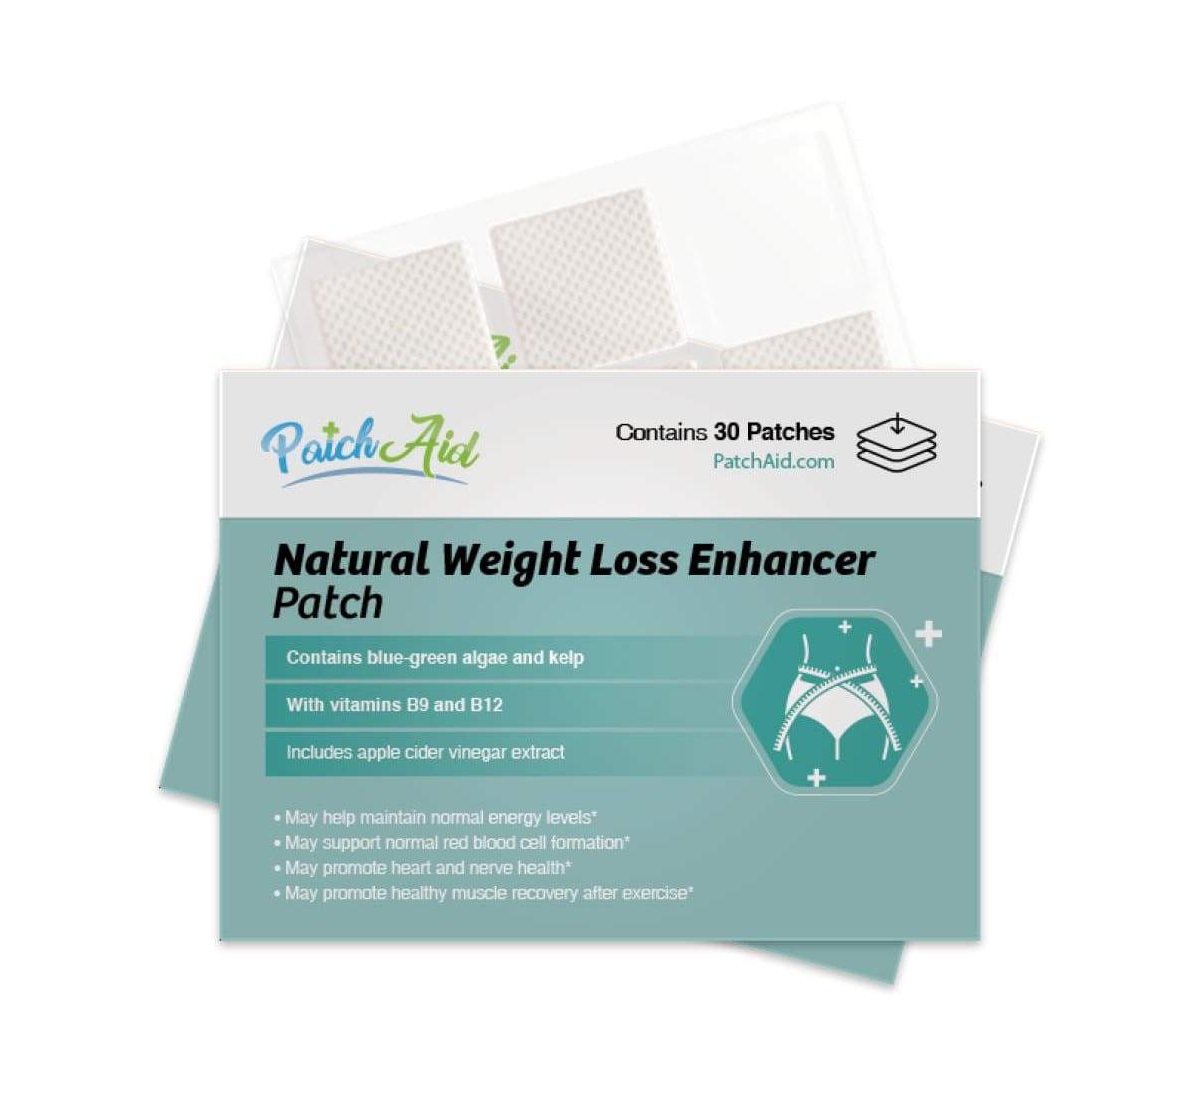 Natural Weight Loss Enhancer Patch by PatchAid (30-Day Supply) - White